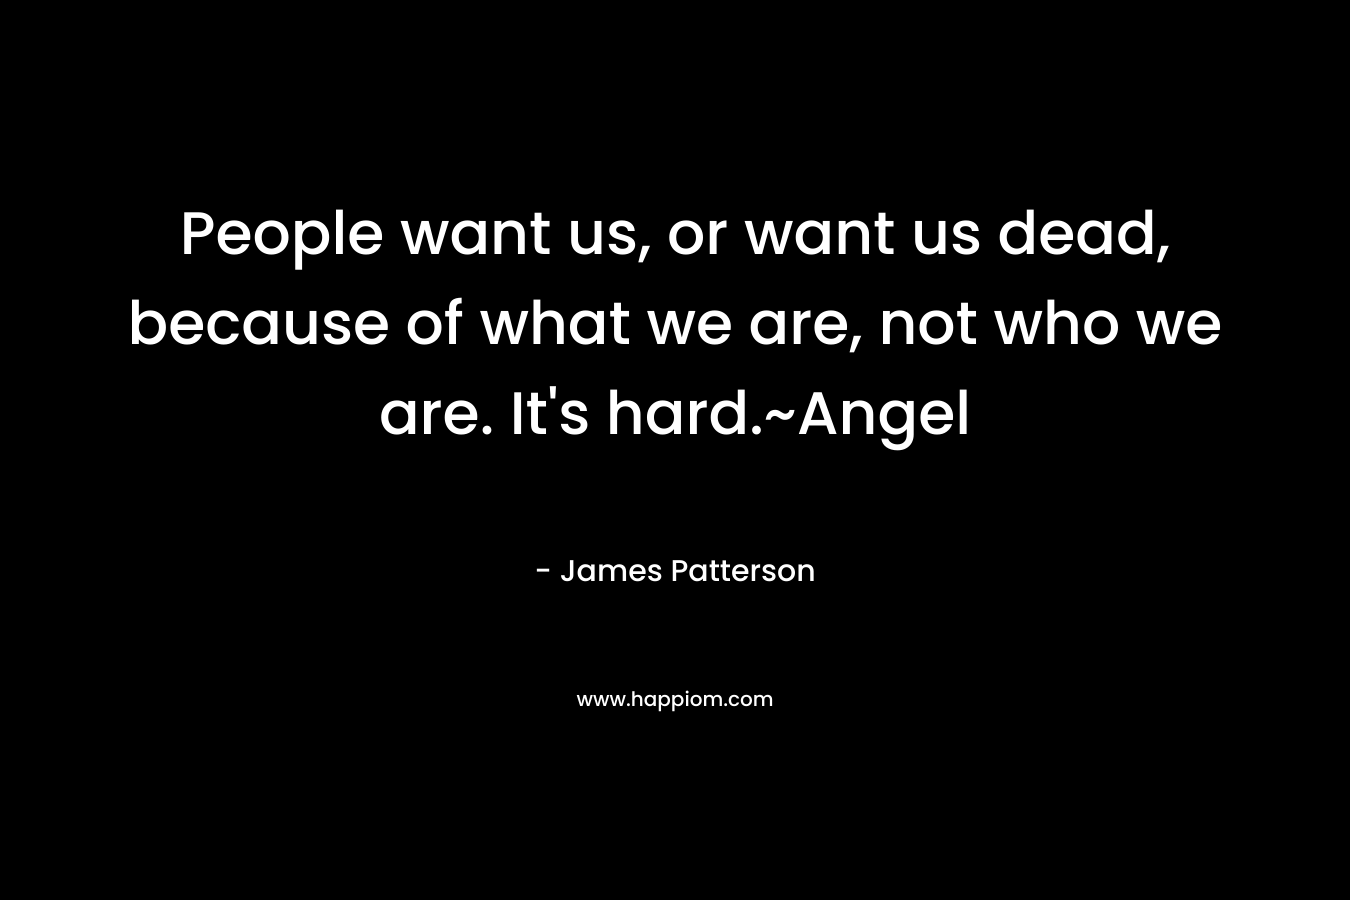 People want us, or want us dead, because of what we are, not who we are. It's hard.~Angel